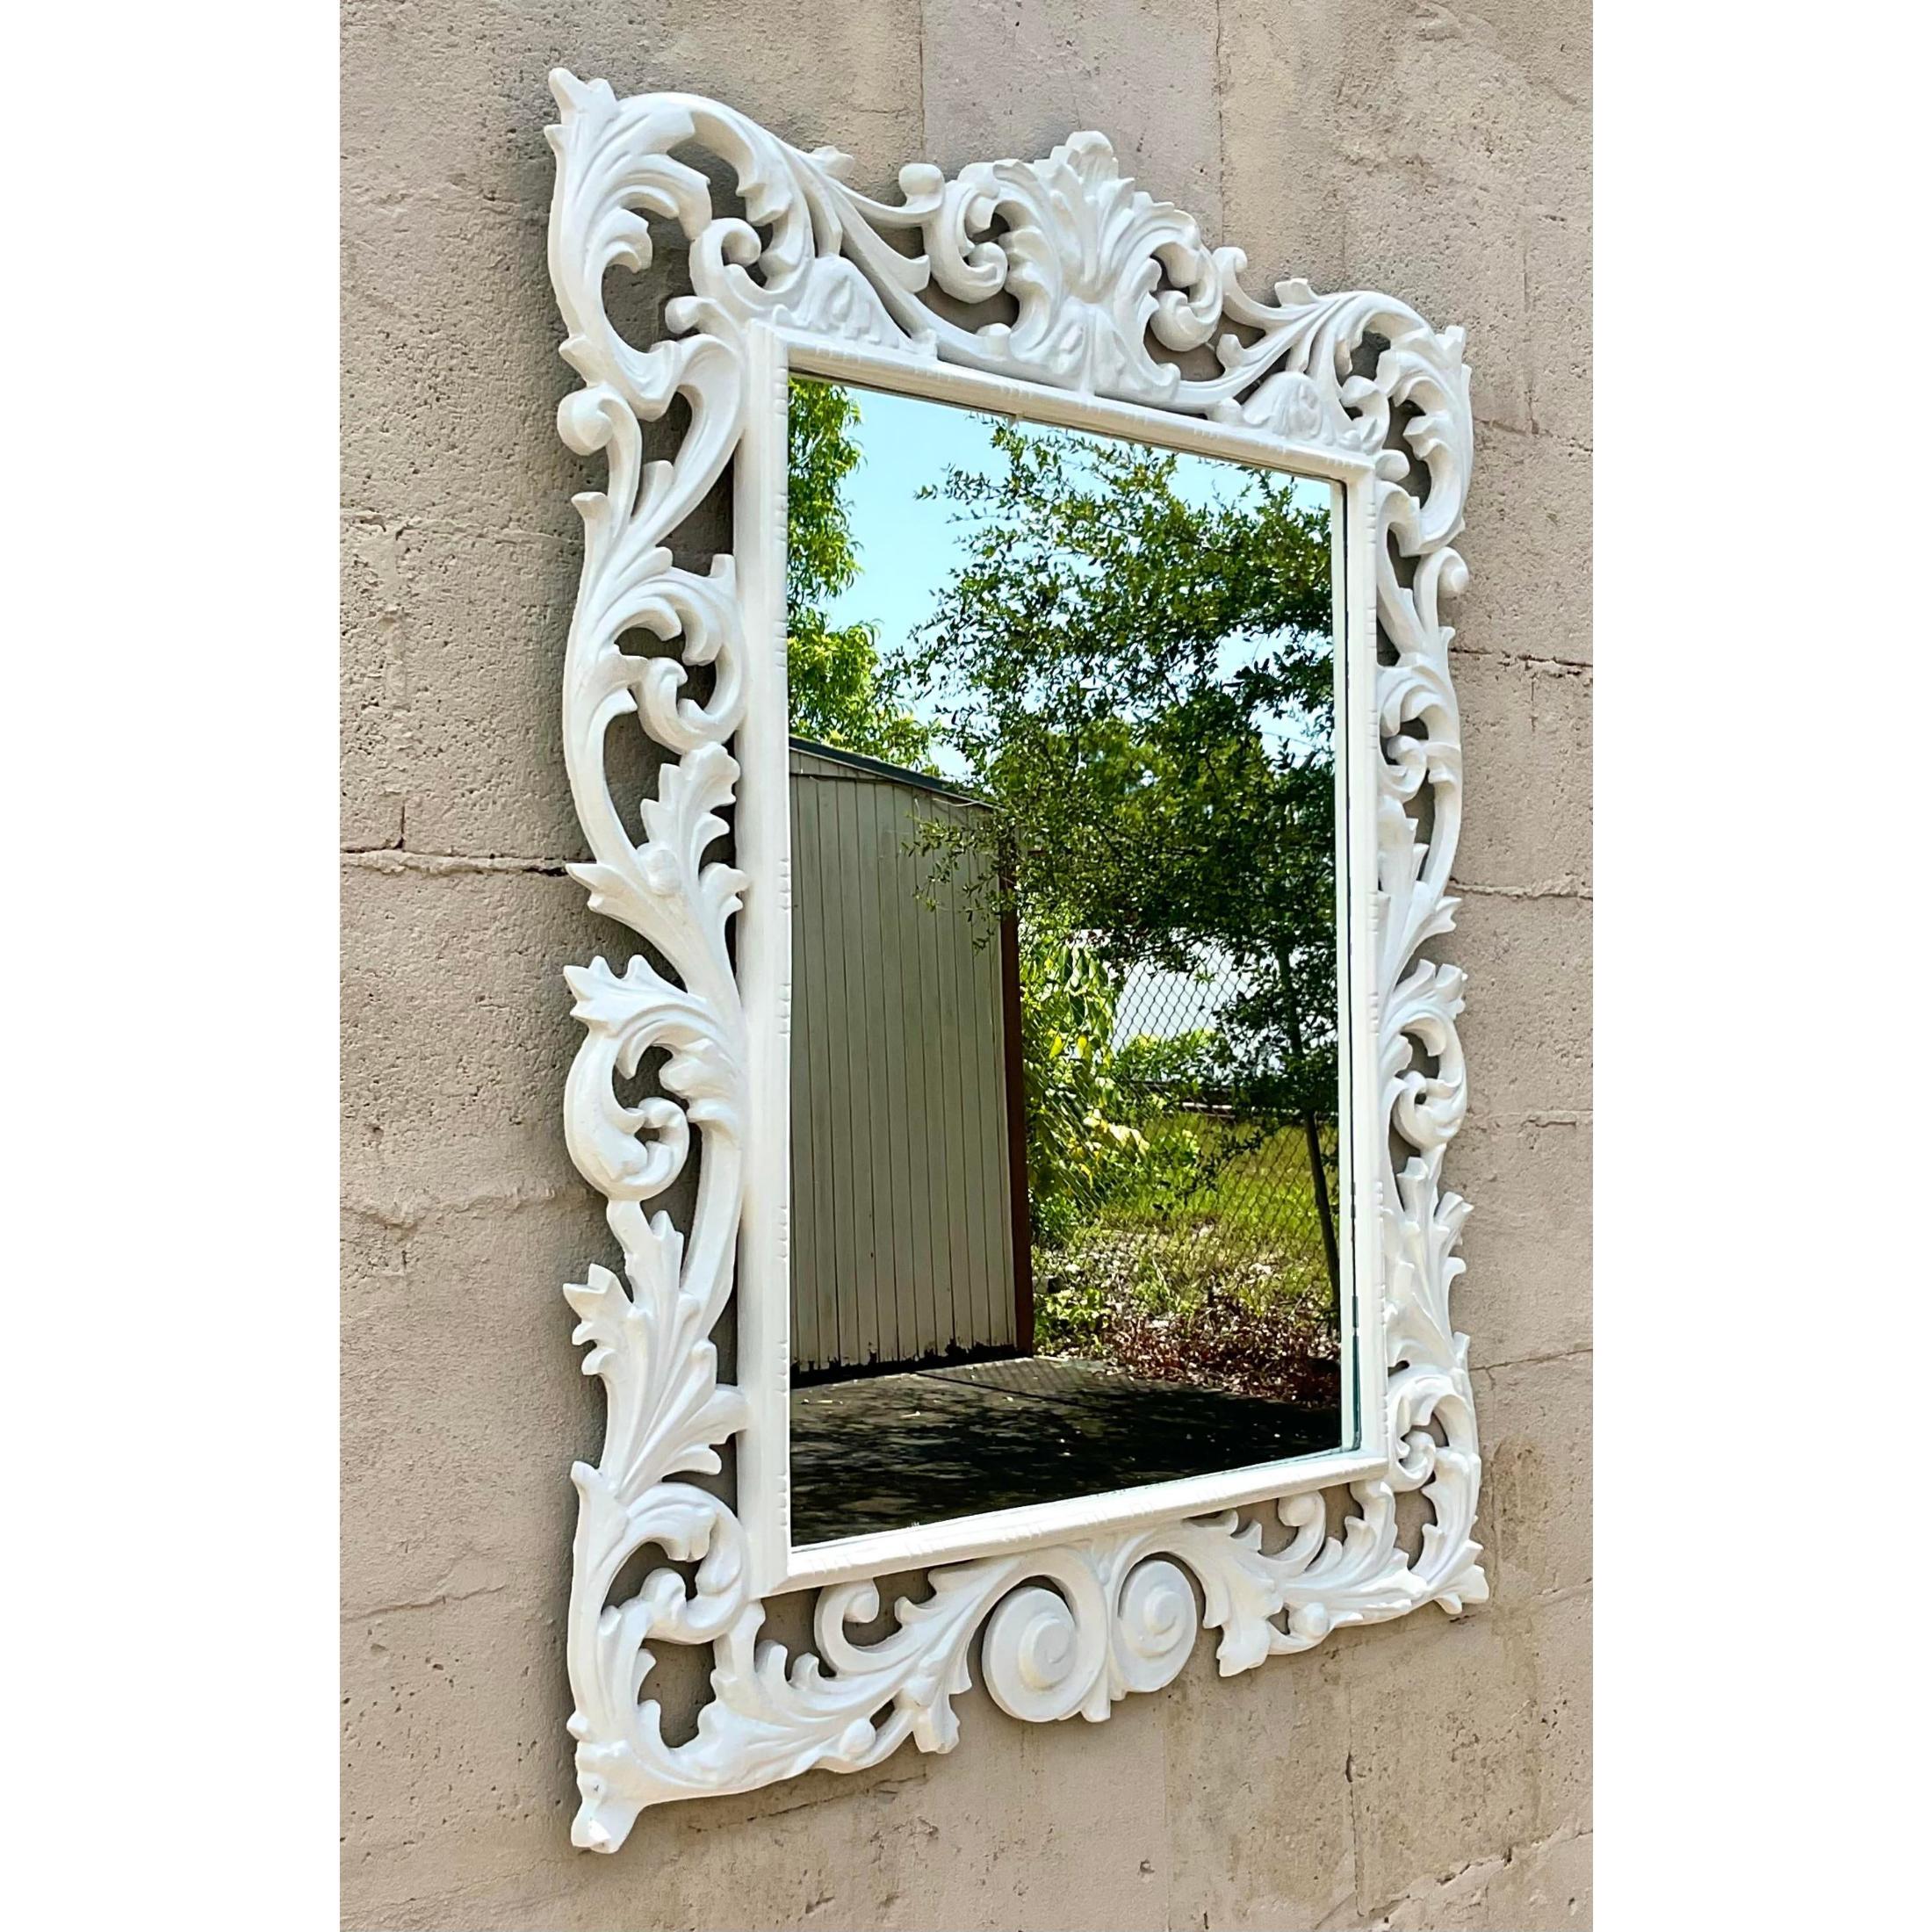 Fantastic vintage Regency mirror. Beautiful carved detail in a bright white lacquered finish. Acquired from a Palm Beach estate.